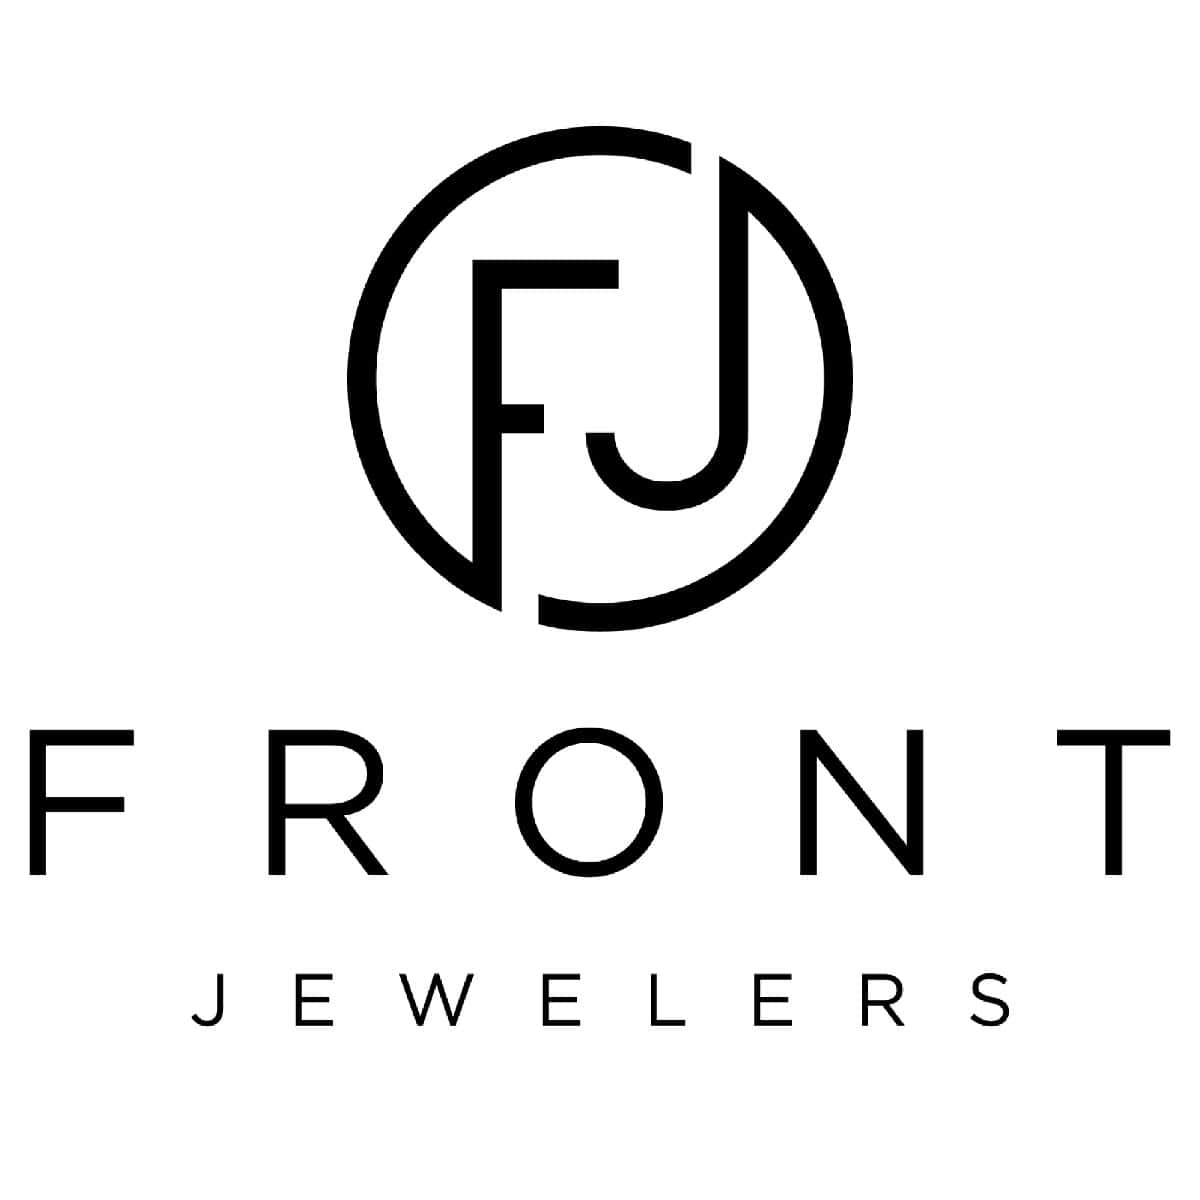 Front Jewelers